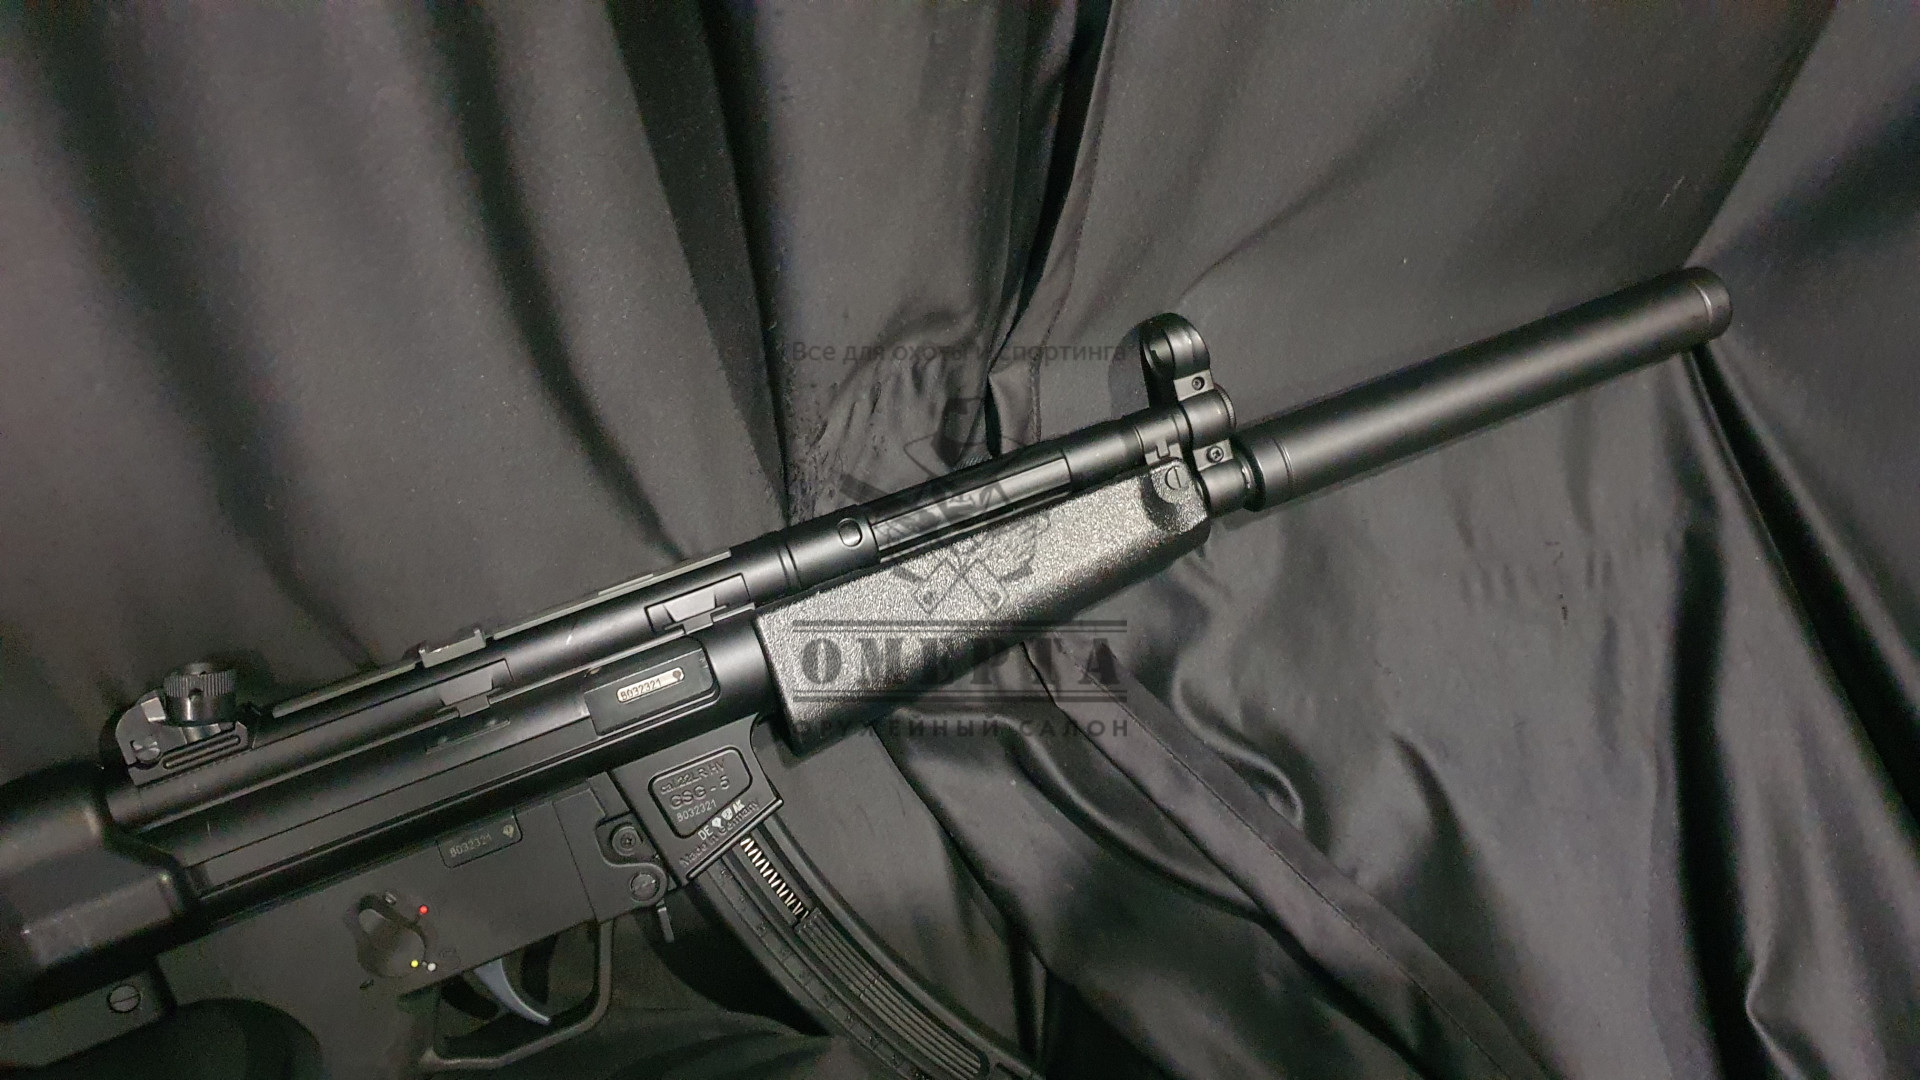 GSG-5, кал.22LR (Made in Germany)